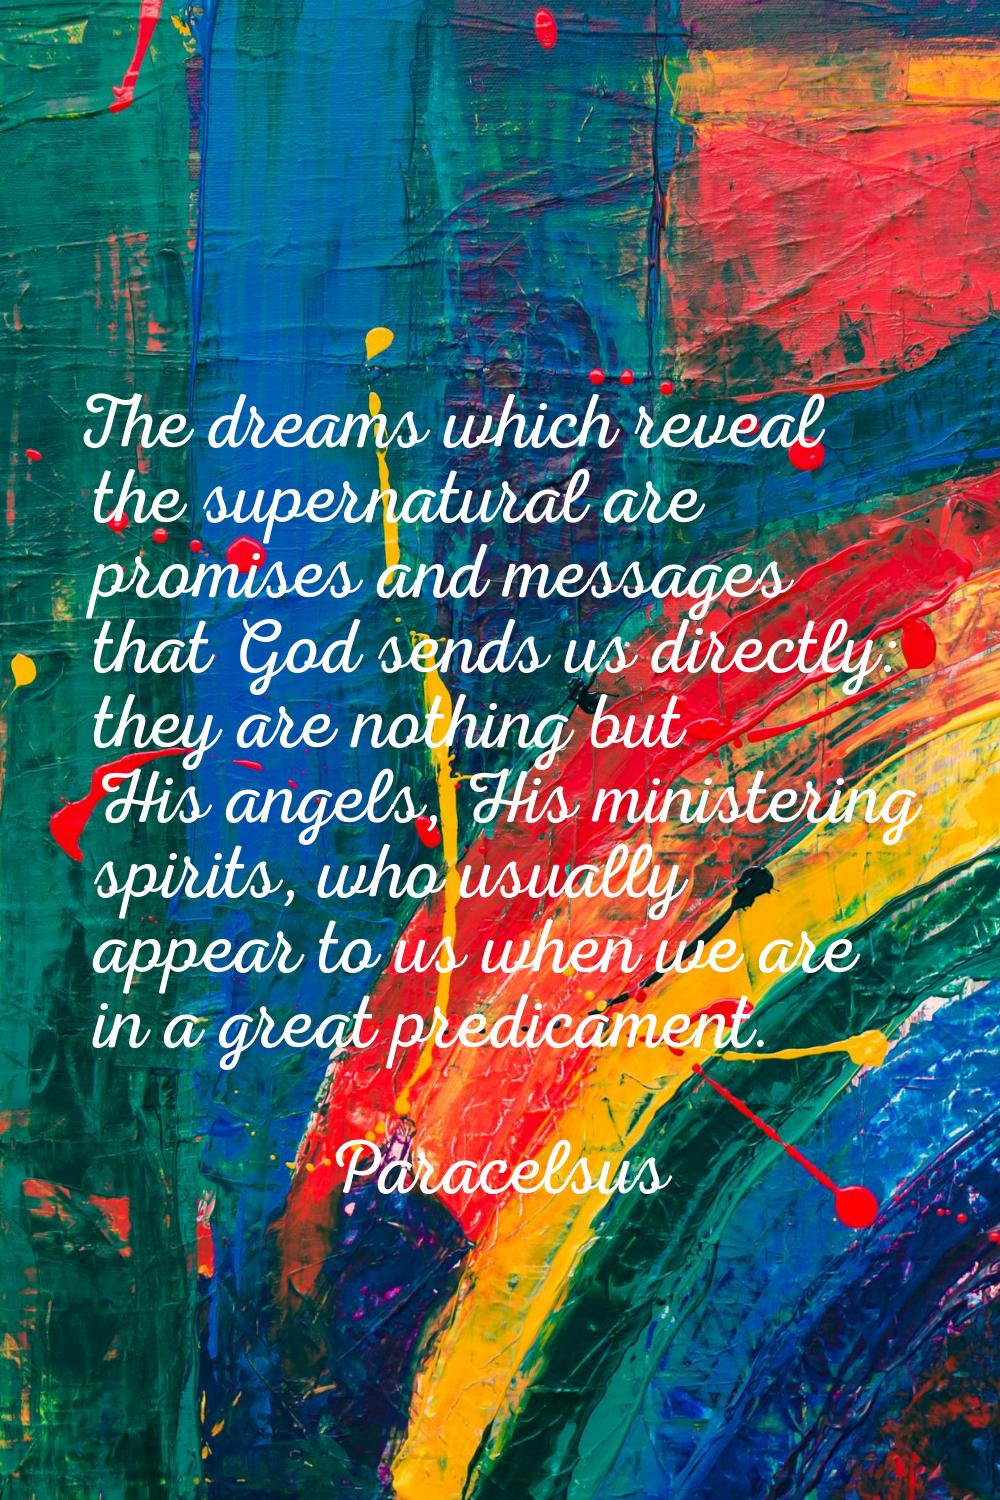 The dreams which reveal the supernatural are promises and messages that God sends us directly: they